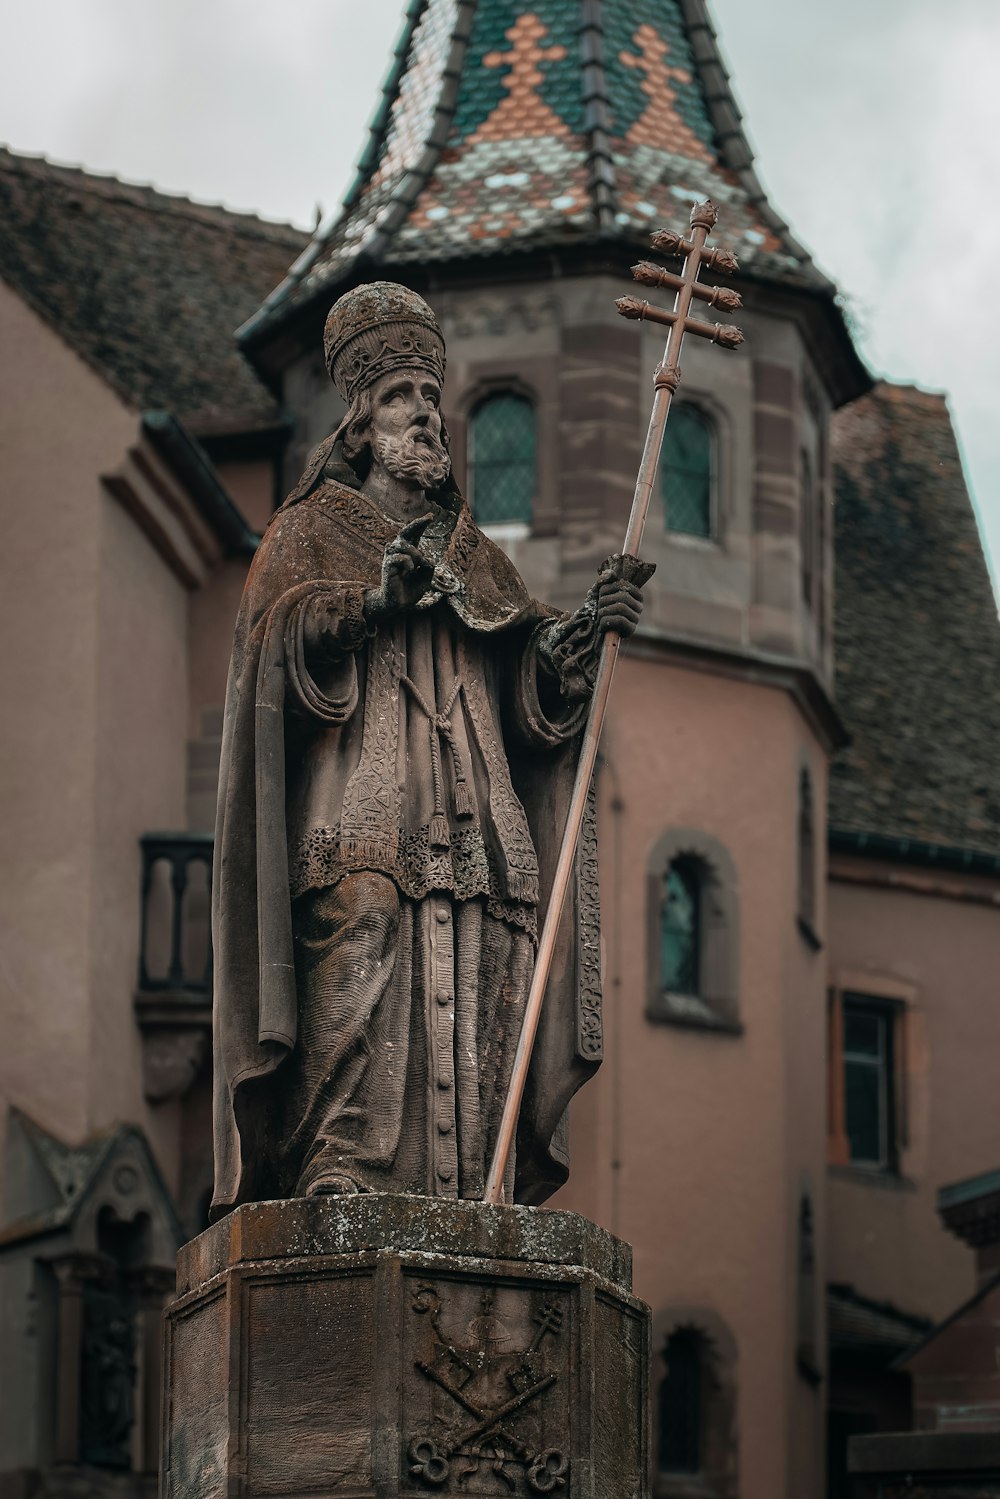 a statue of a man holding a cross in front of a building